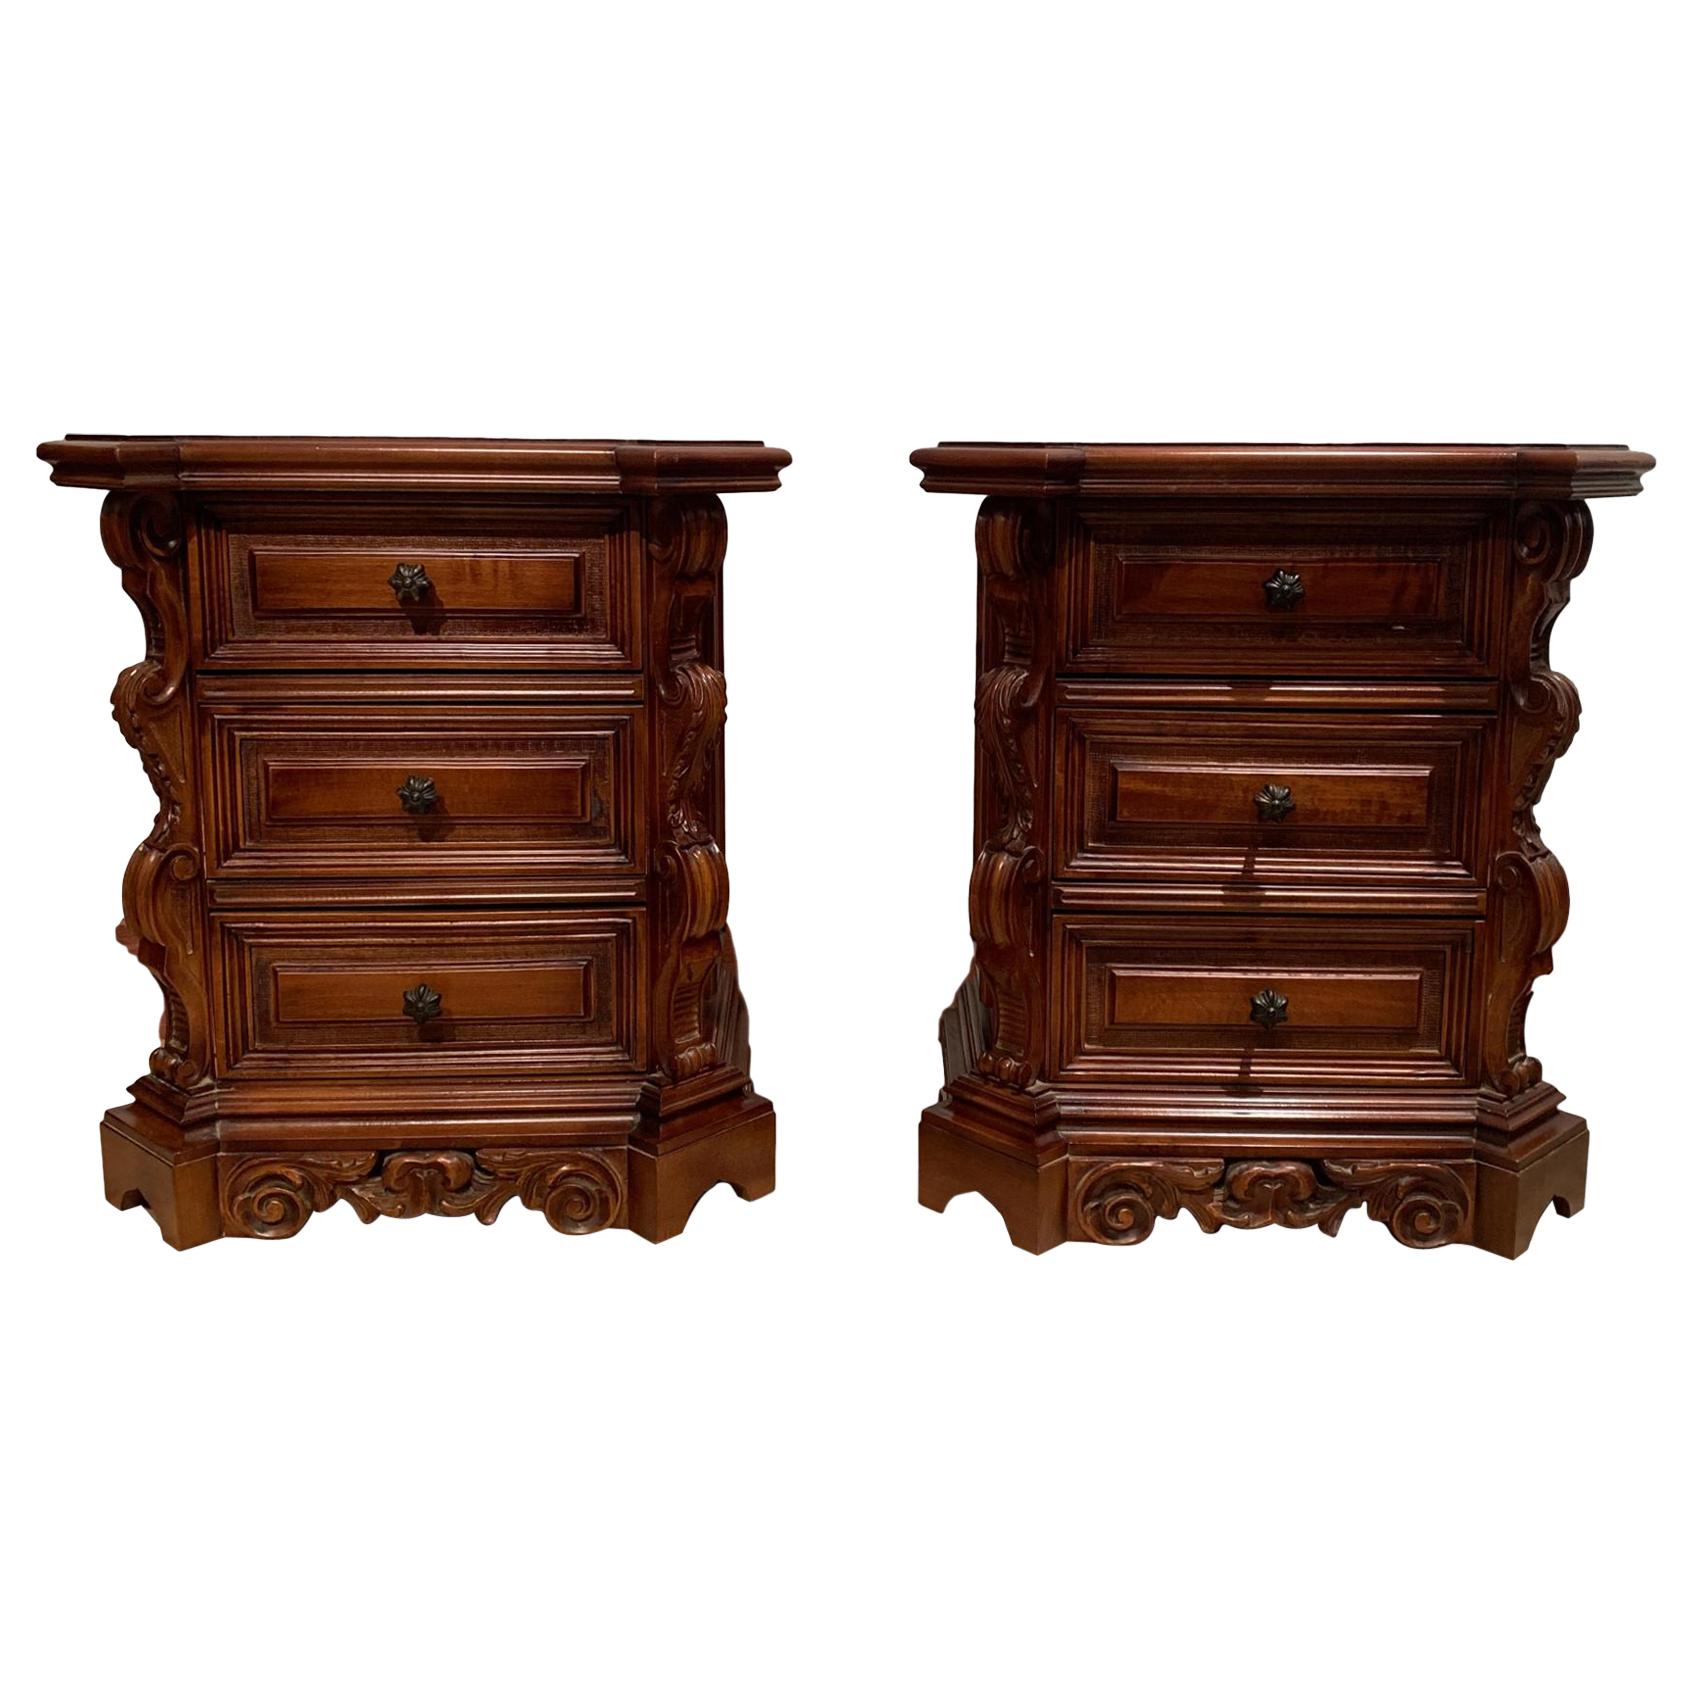 Pair of Hand Carved Walnut Commodes, Italian, circa 1920